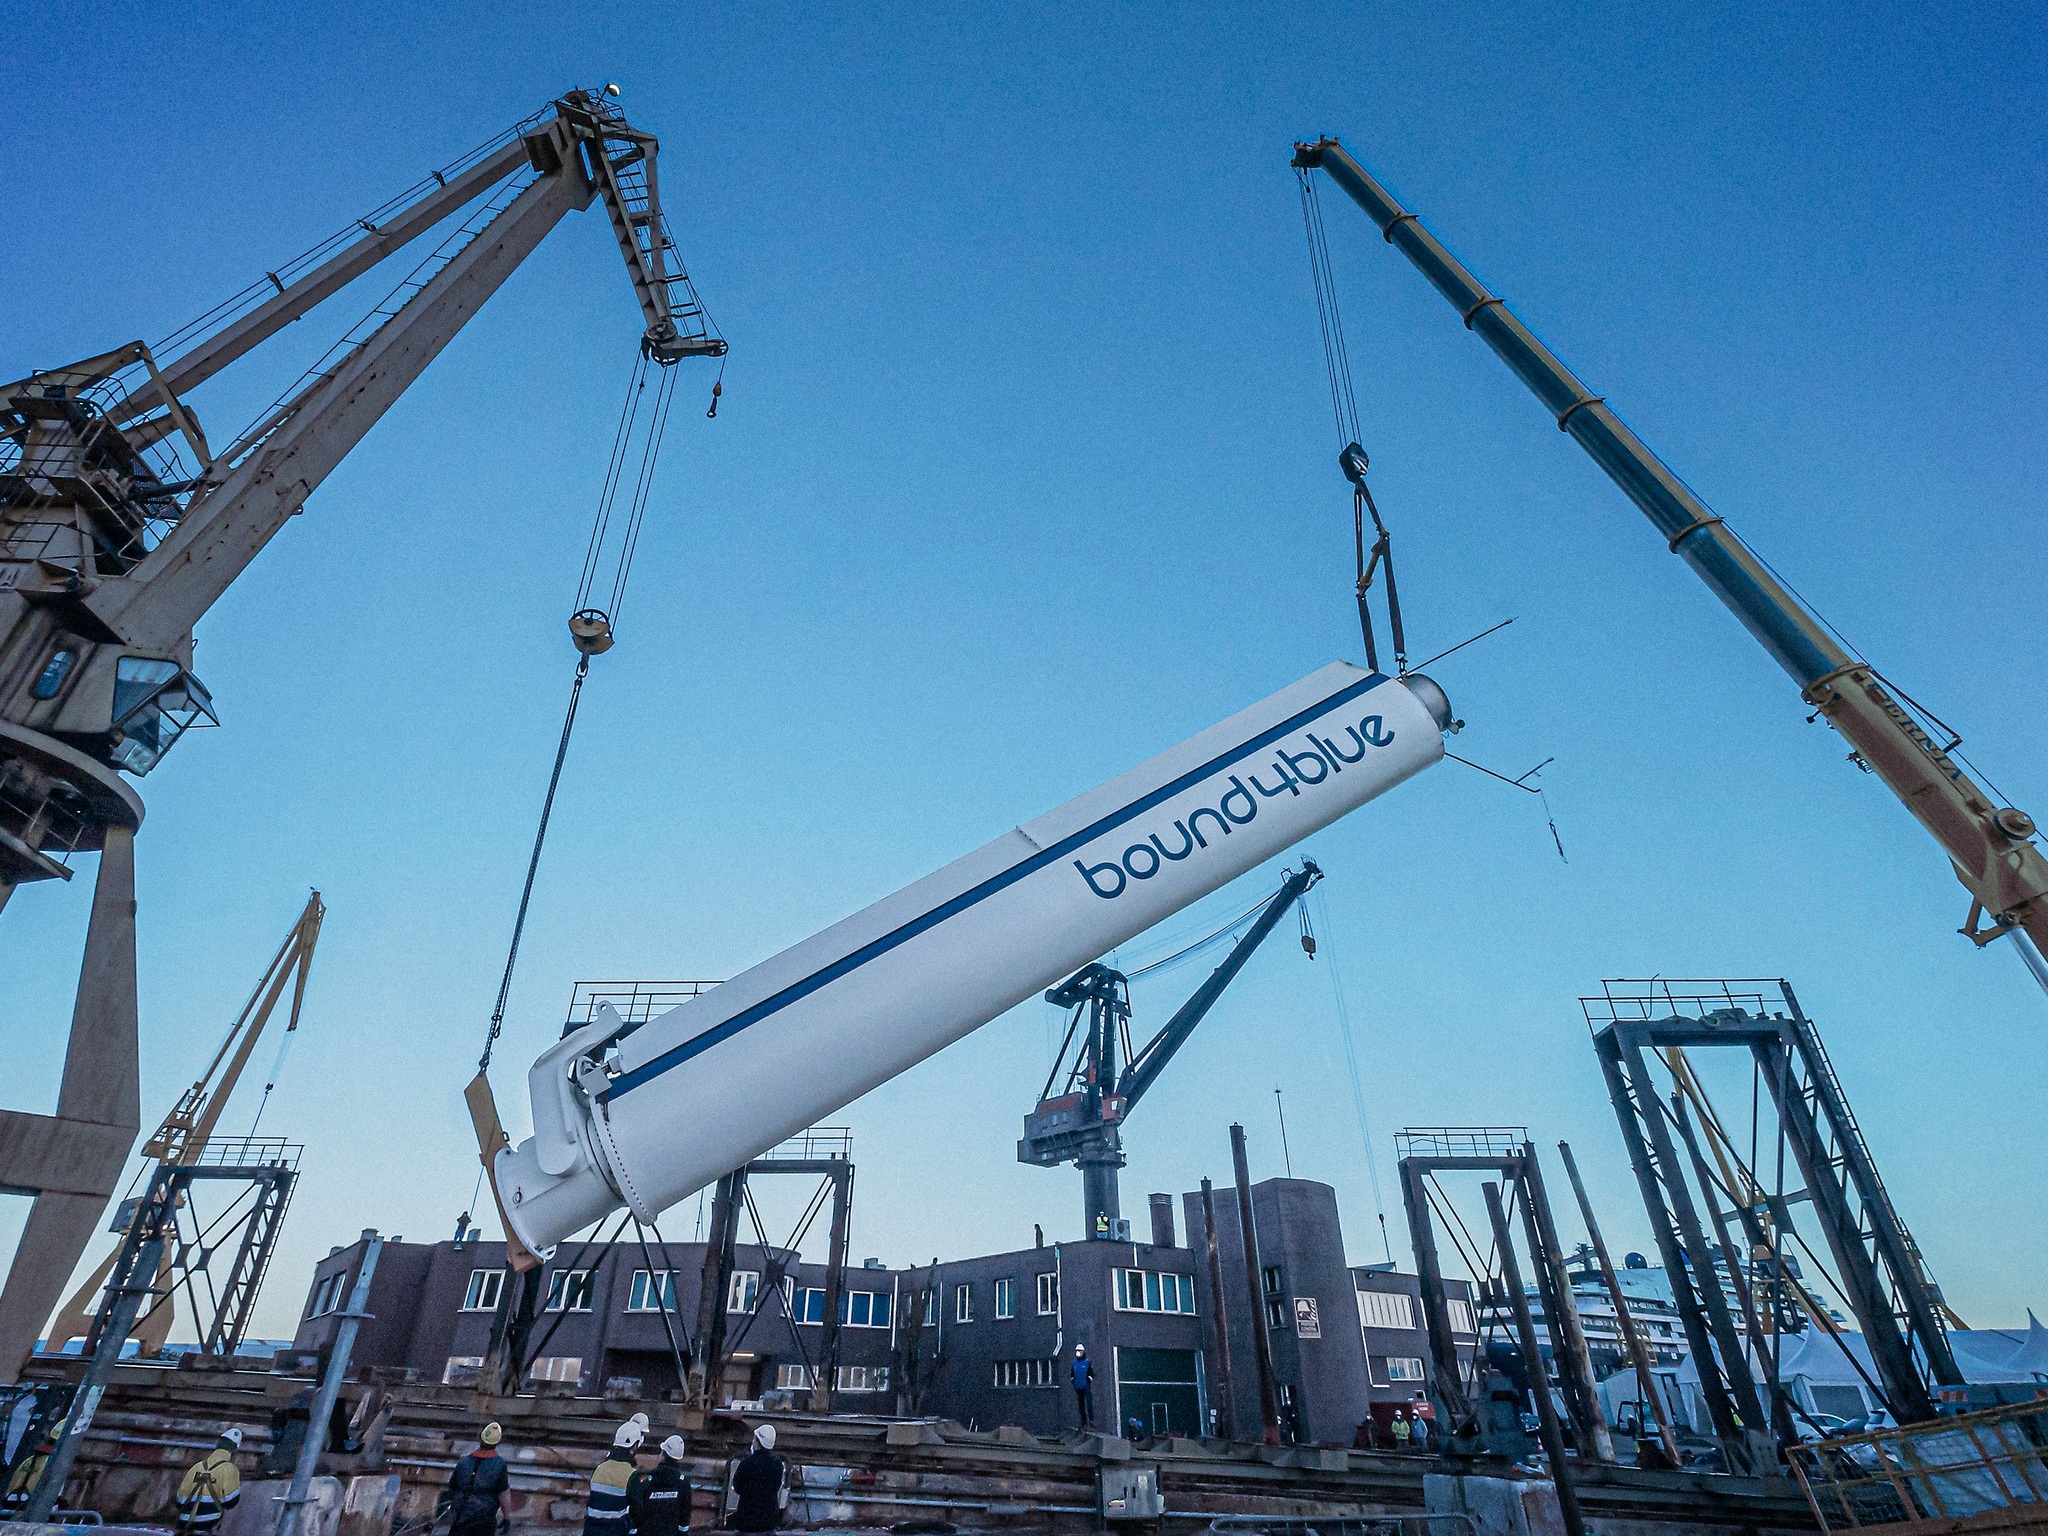 Largest suction sail in the world being installed at a shipyard. © bound4blue, 2021